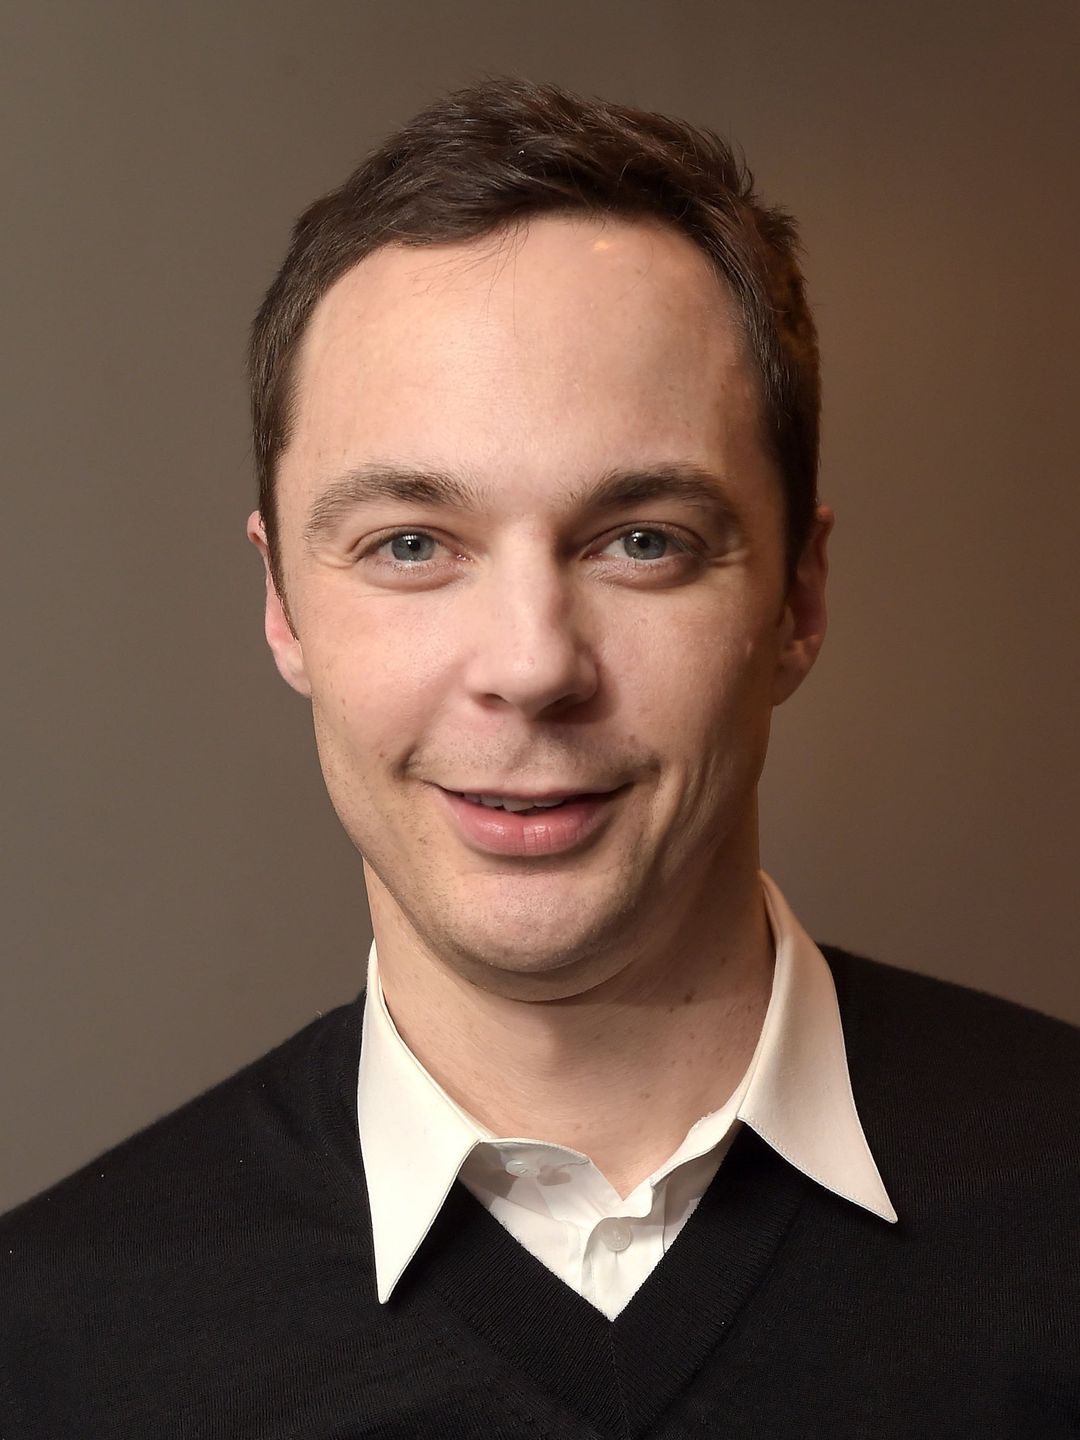 Jim Parsons who is his father